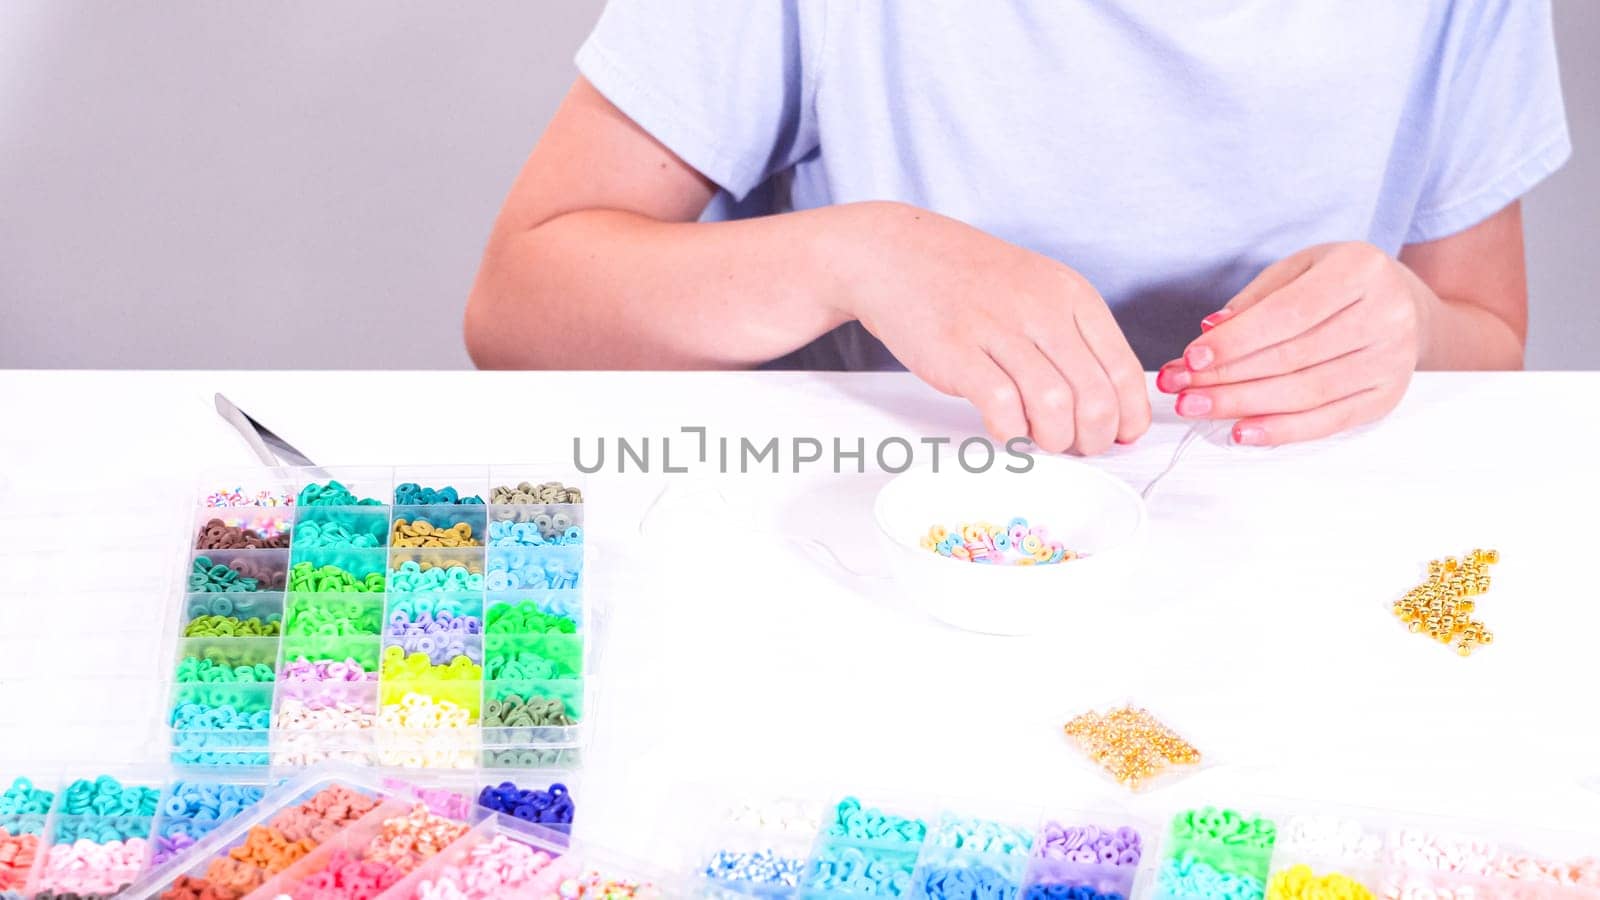 Delicate fingers of a young girl navigate through a treasure trove of bright, multicolored beads, each compartment revealing a new hue to choose from.